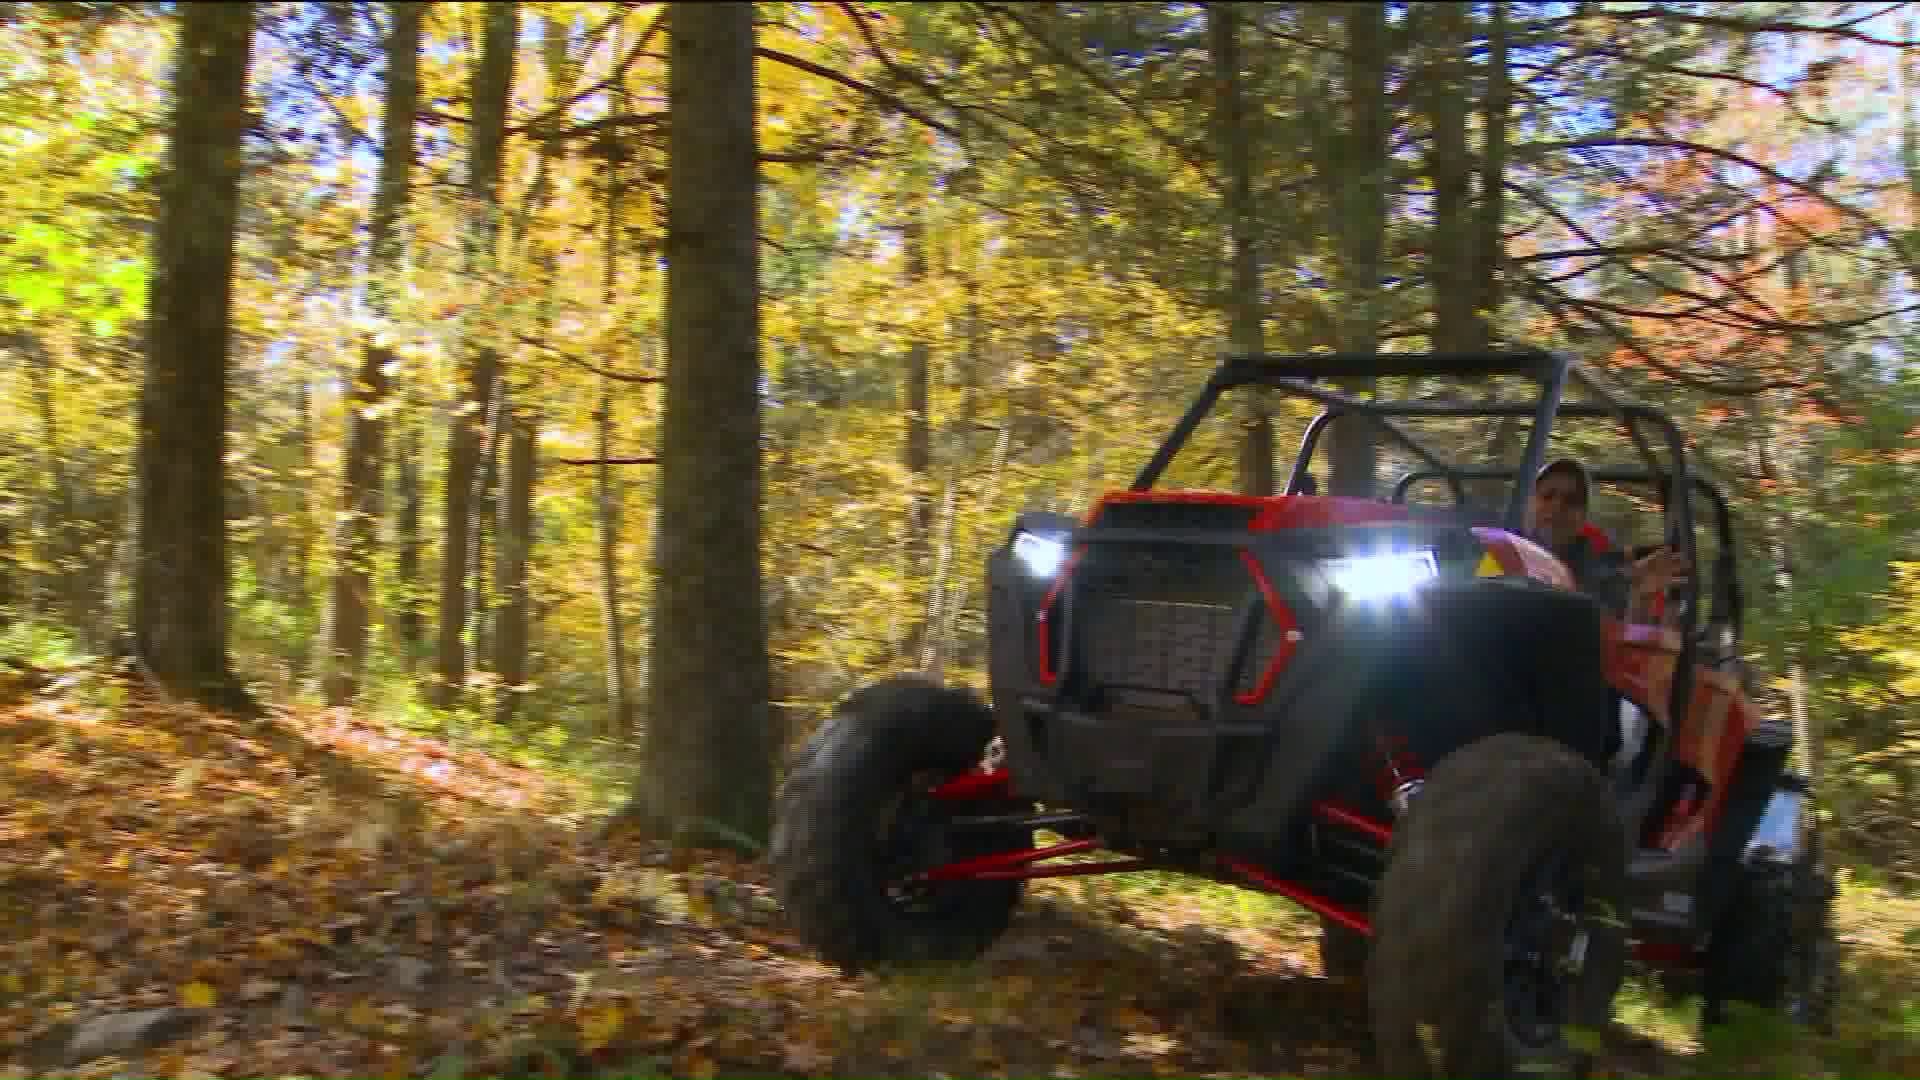 Daytrippers: Canaan has a wild side, see it on a UTV Tour